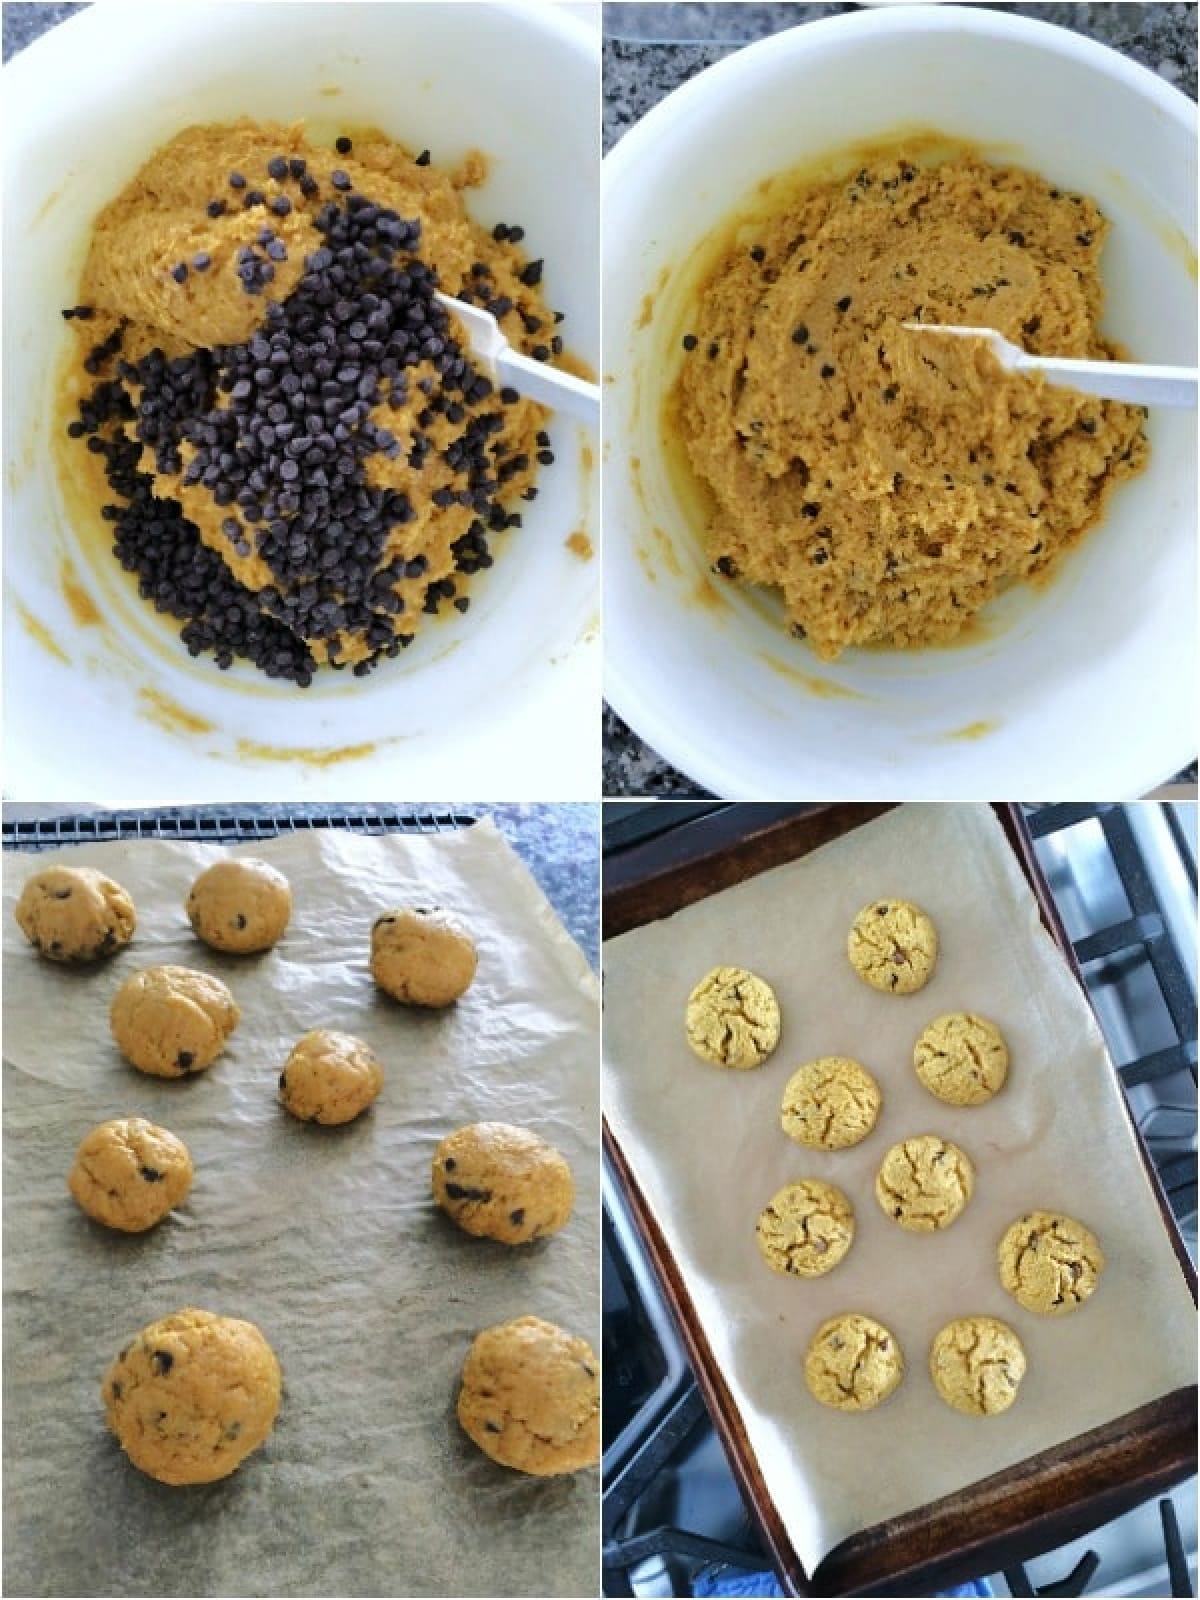 A four image collage showing how to make pumpkin cookies: add chocolate chips to the cookie dough, roll into balls, place on cookie sheet and bake.